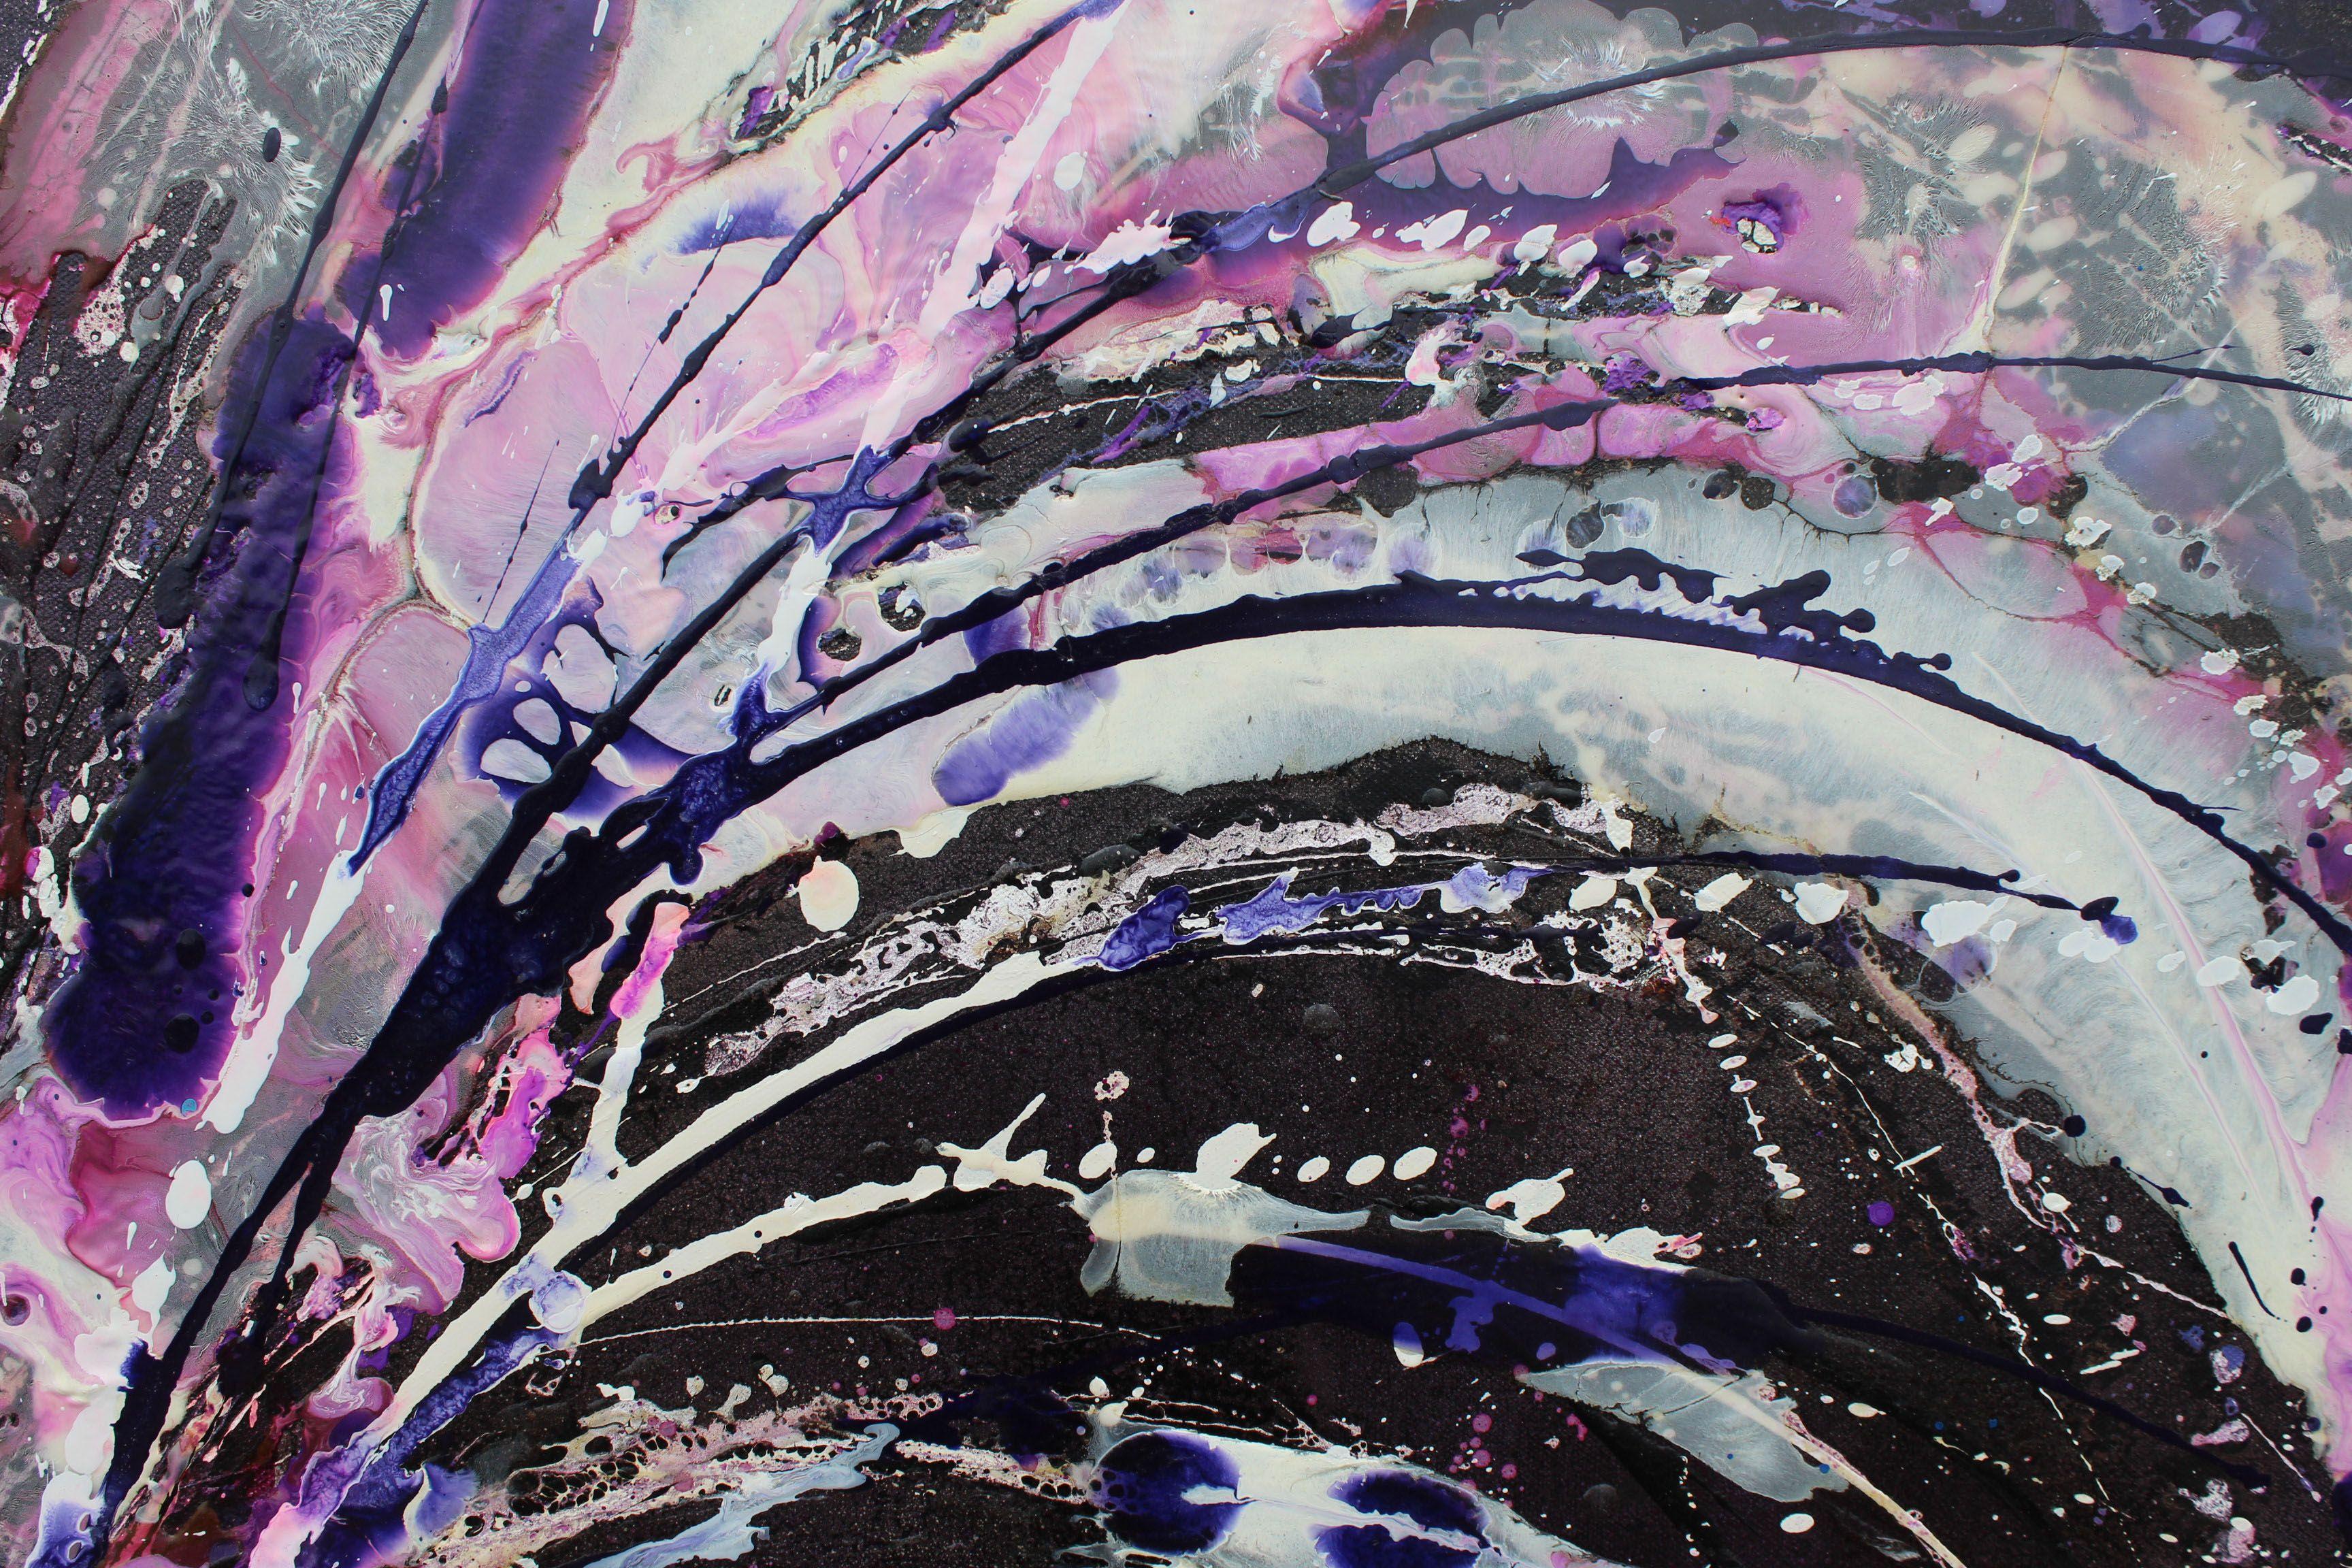 Neptune's Galaxy, Painting, Acrylic on Canvas - Black Abstract Painting by Rachel McCullock